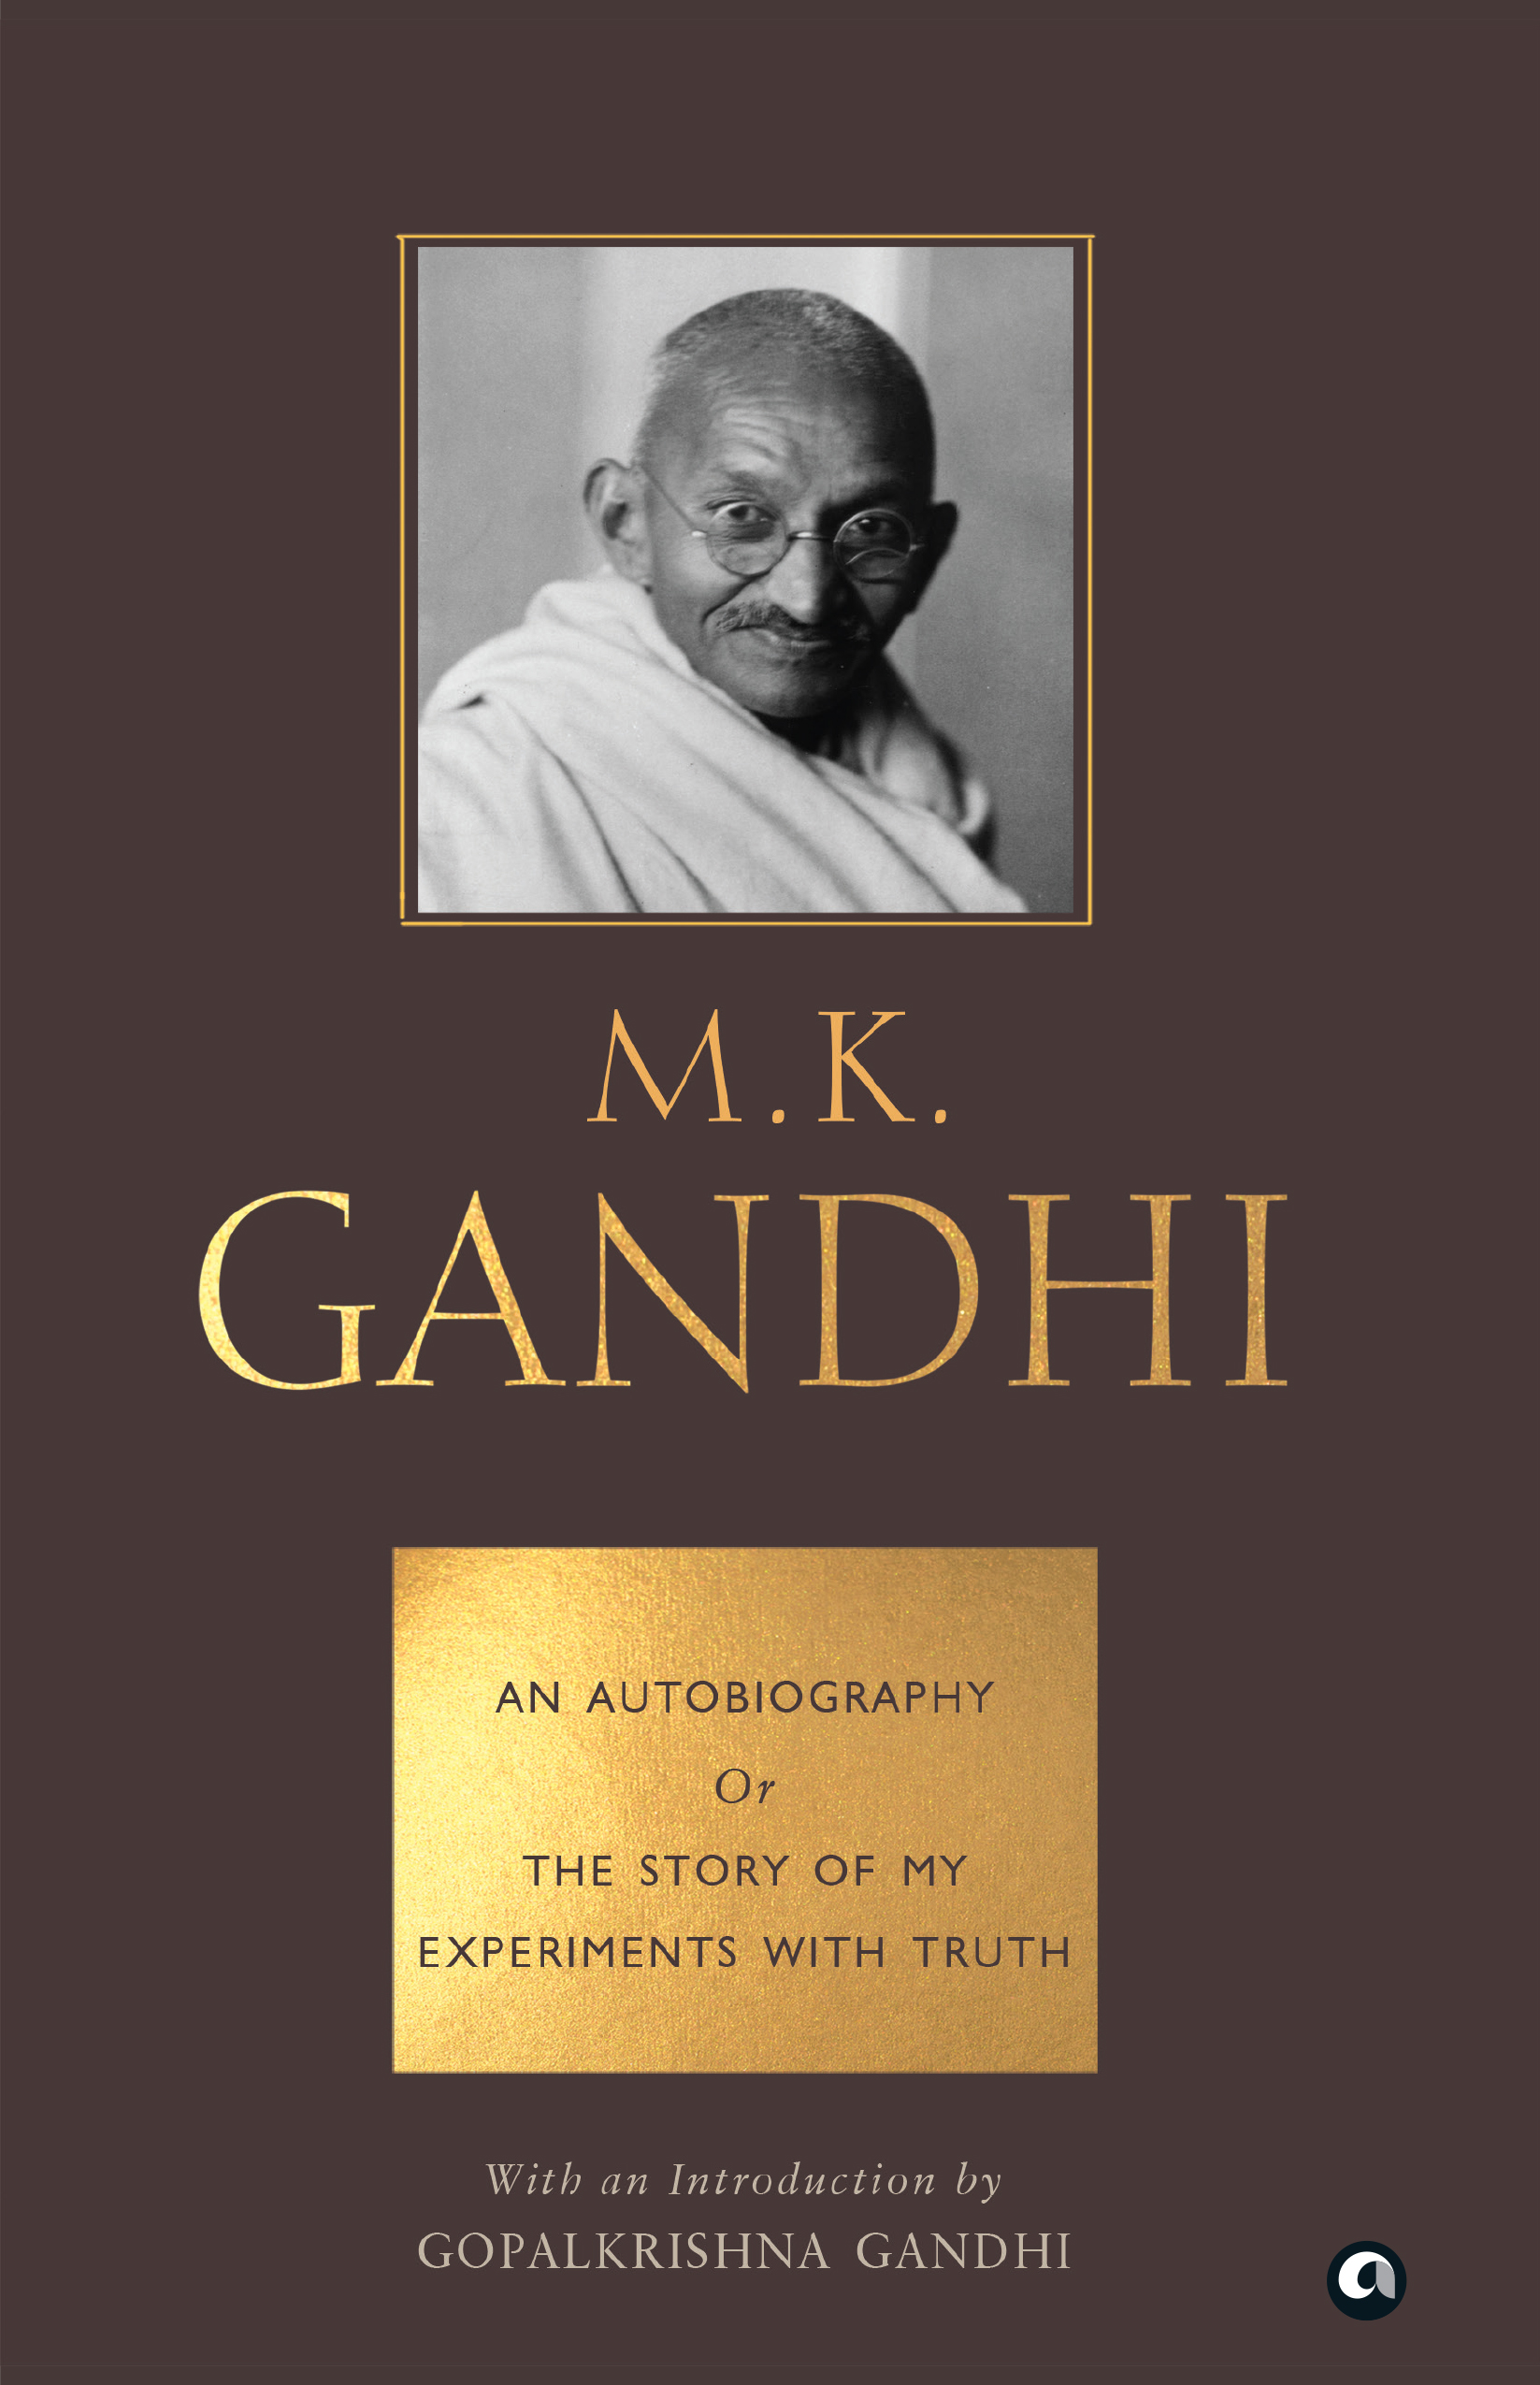 autobiography of mahatma gandhi my experiments with truth